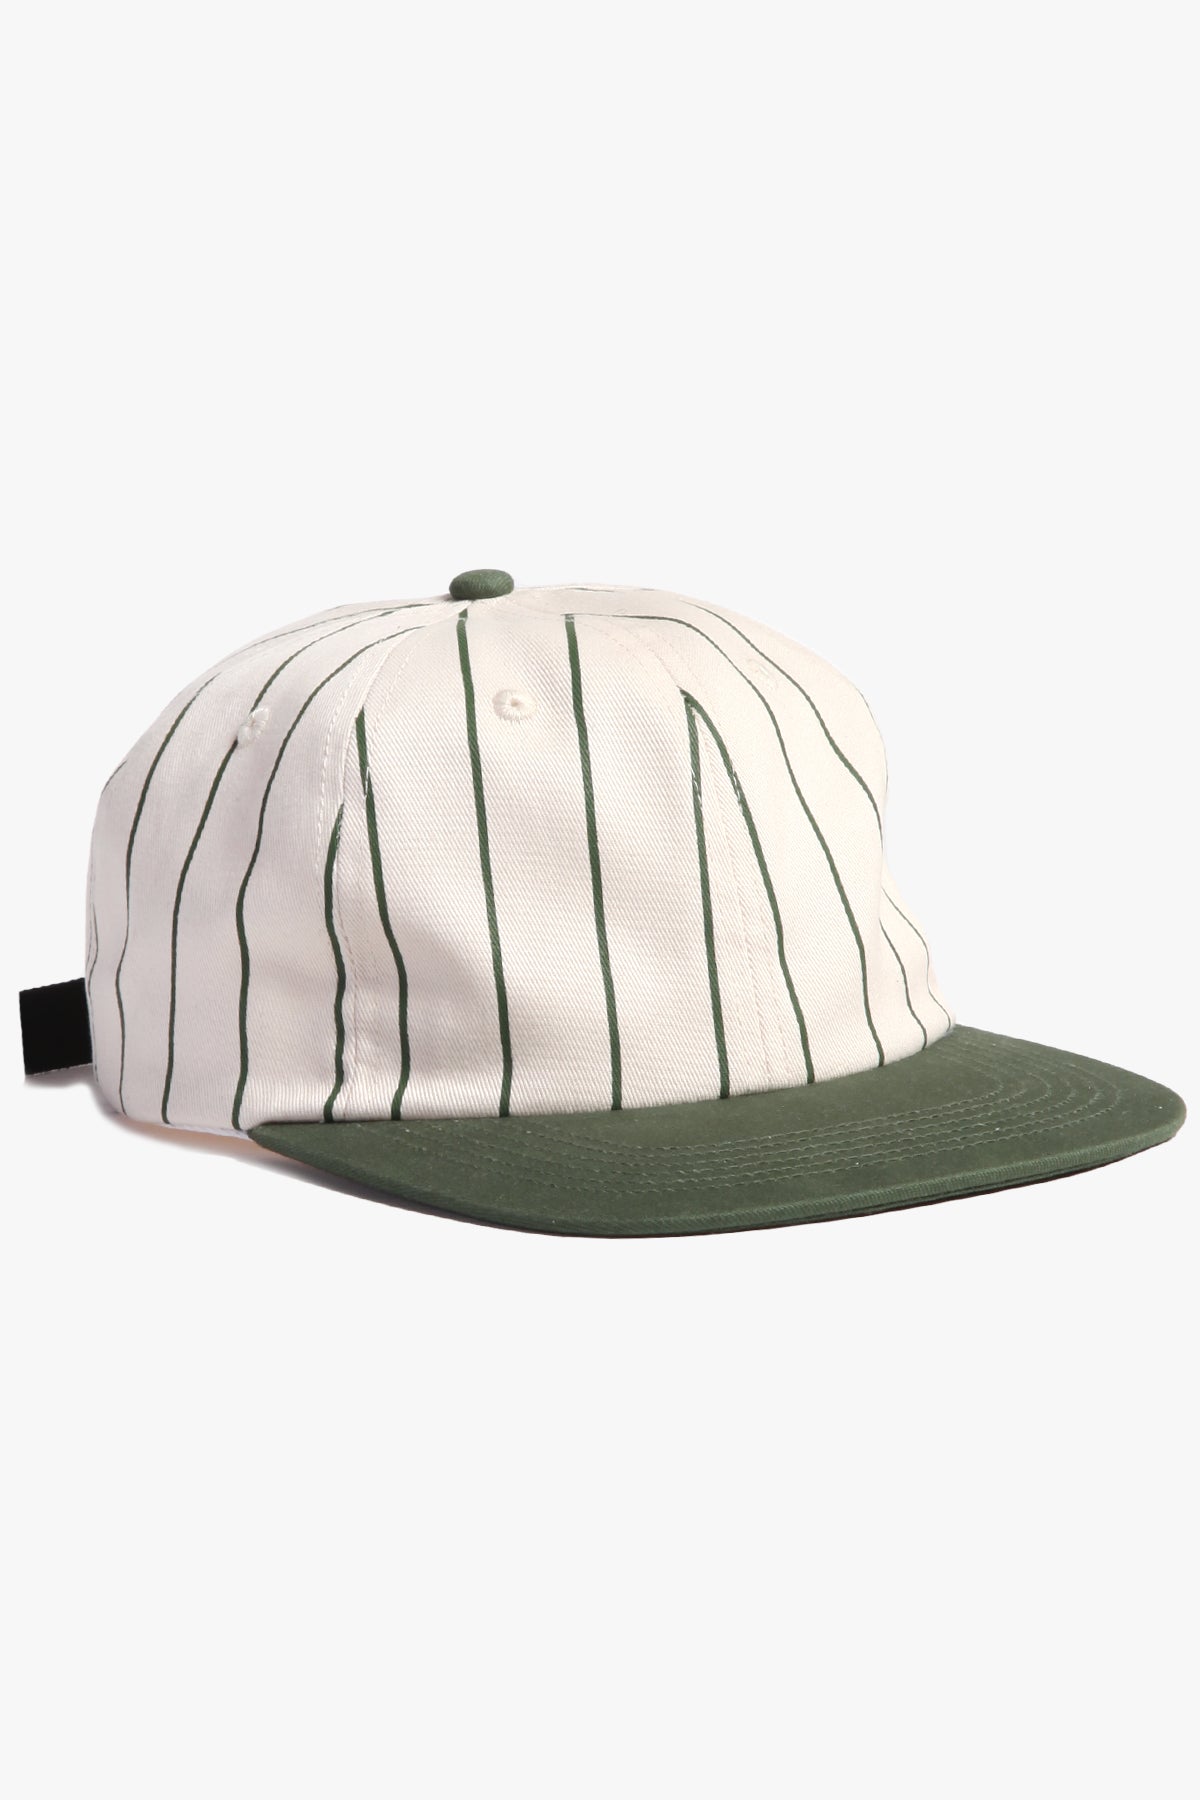 Power House - Perfect 6-Panel Cap - Striped Green